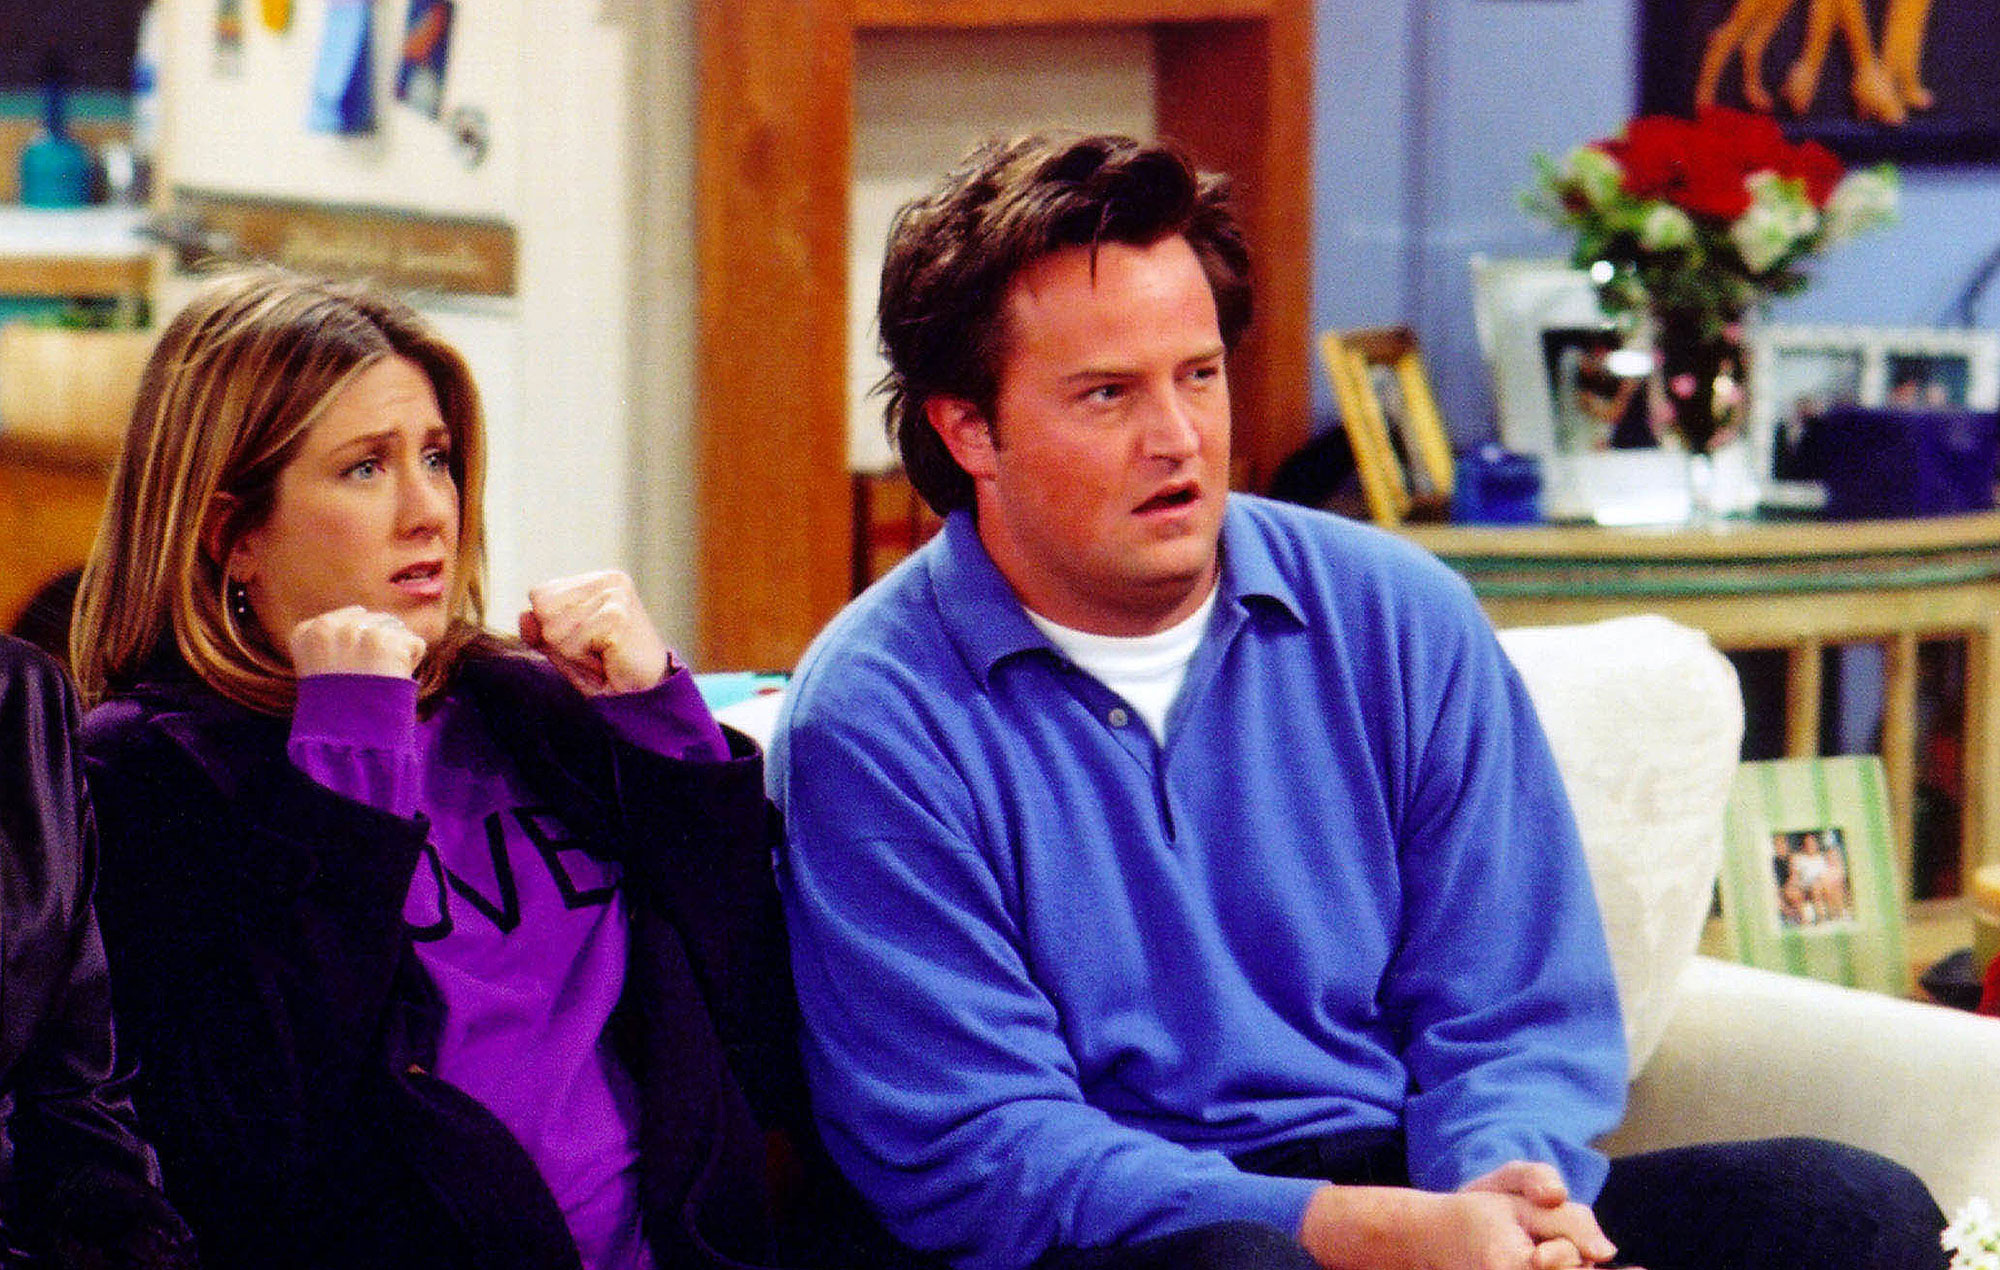 Jennifer Aniston pays tribute to Matthew Perry: “This one has cut deep”